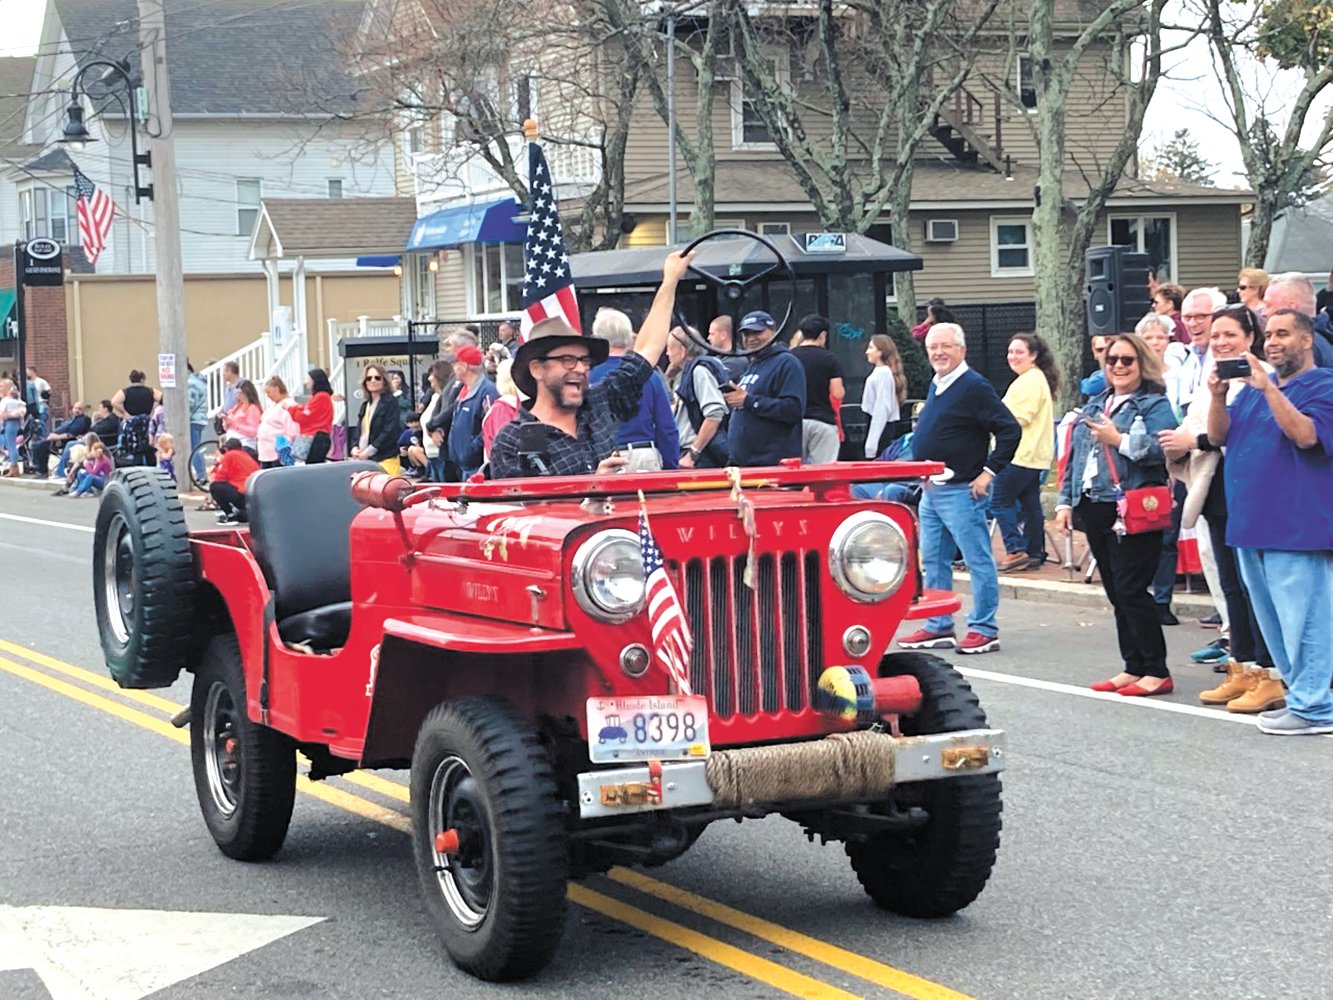 LOOK MA NO HANDS…OR WHEEL: Friday’s parade featured a variety of antique cars, fire trucks and military vehicles. Toward the end of the parade individuals were having fun honking car horns and – in one case – removing the steering wheel from the car.